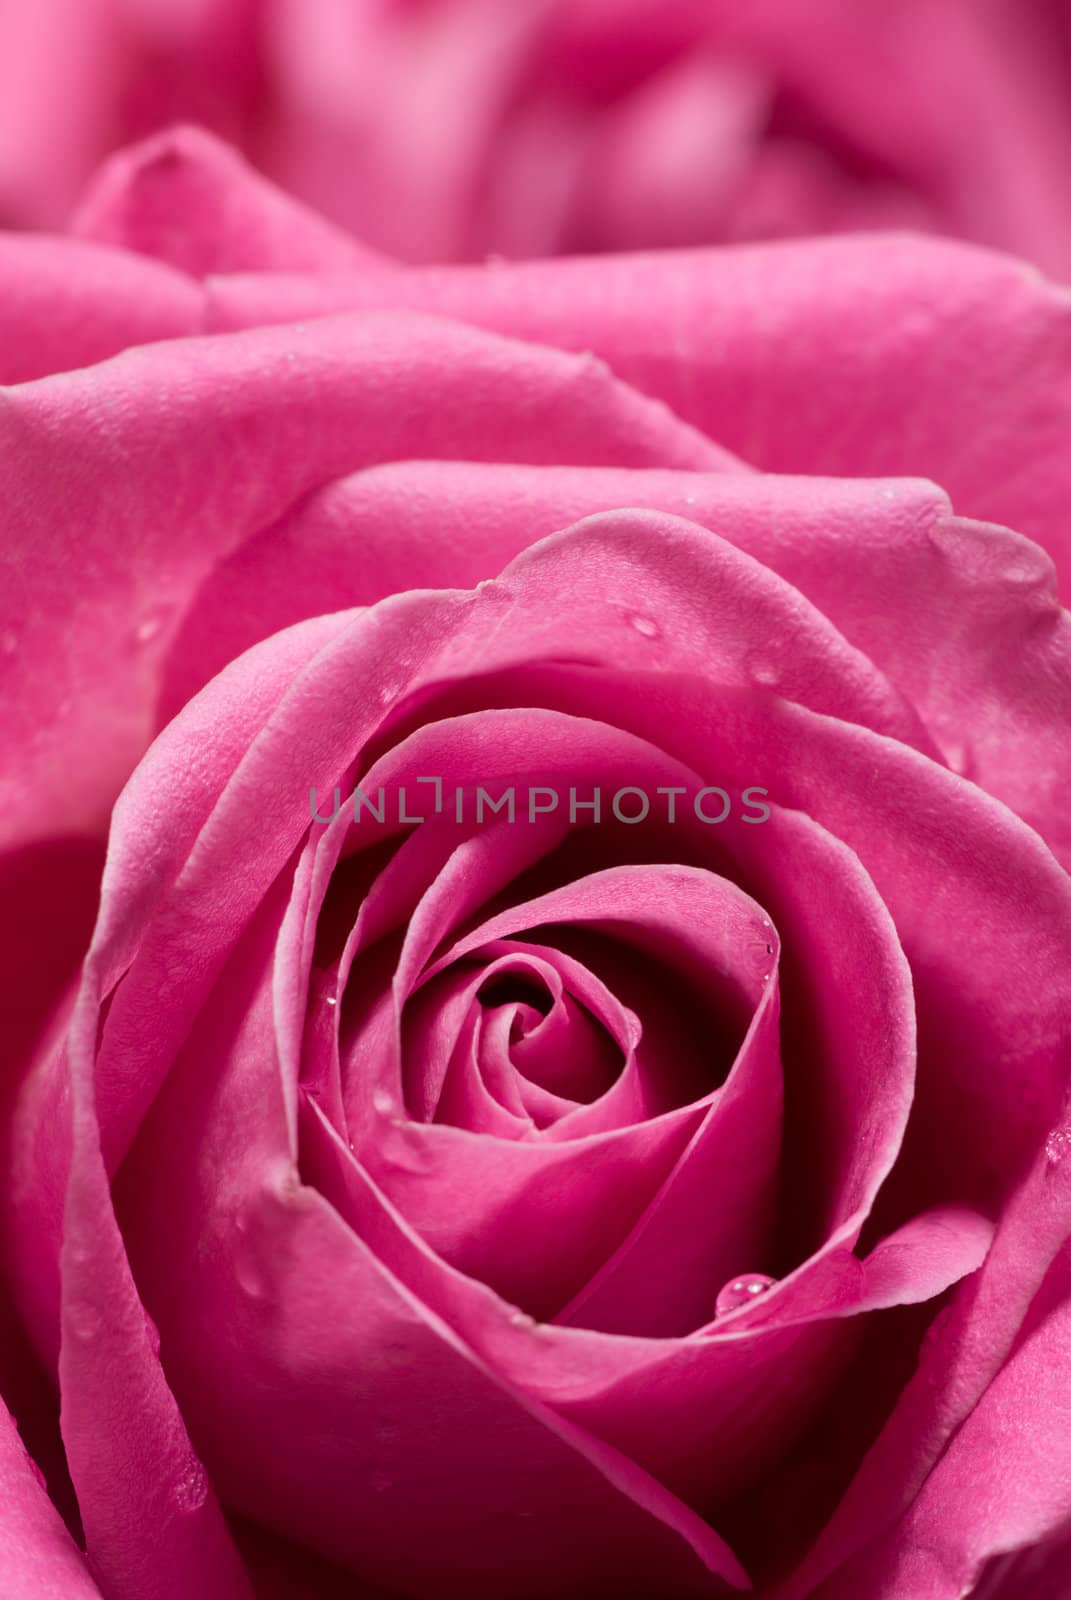 Pink roses - intentional selective focus in the middle of the flower.